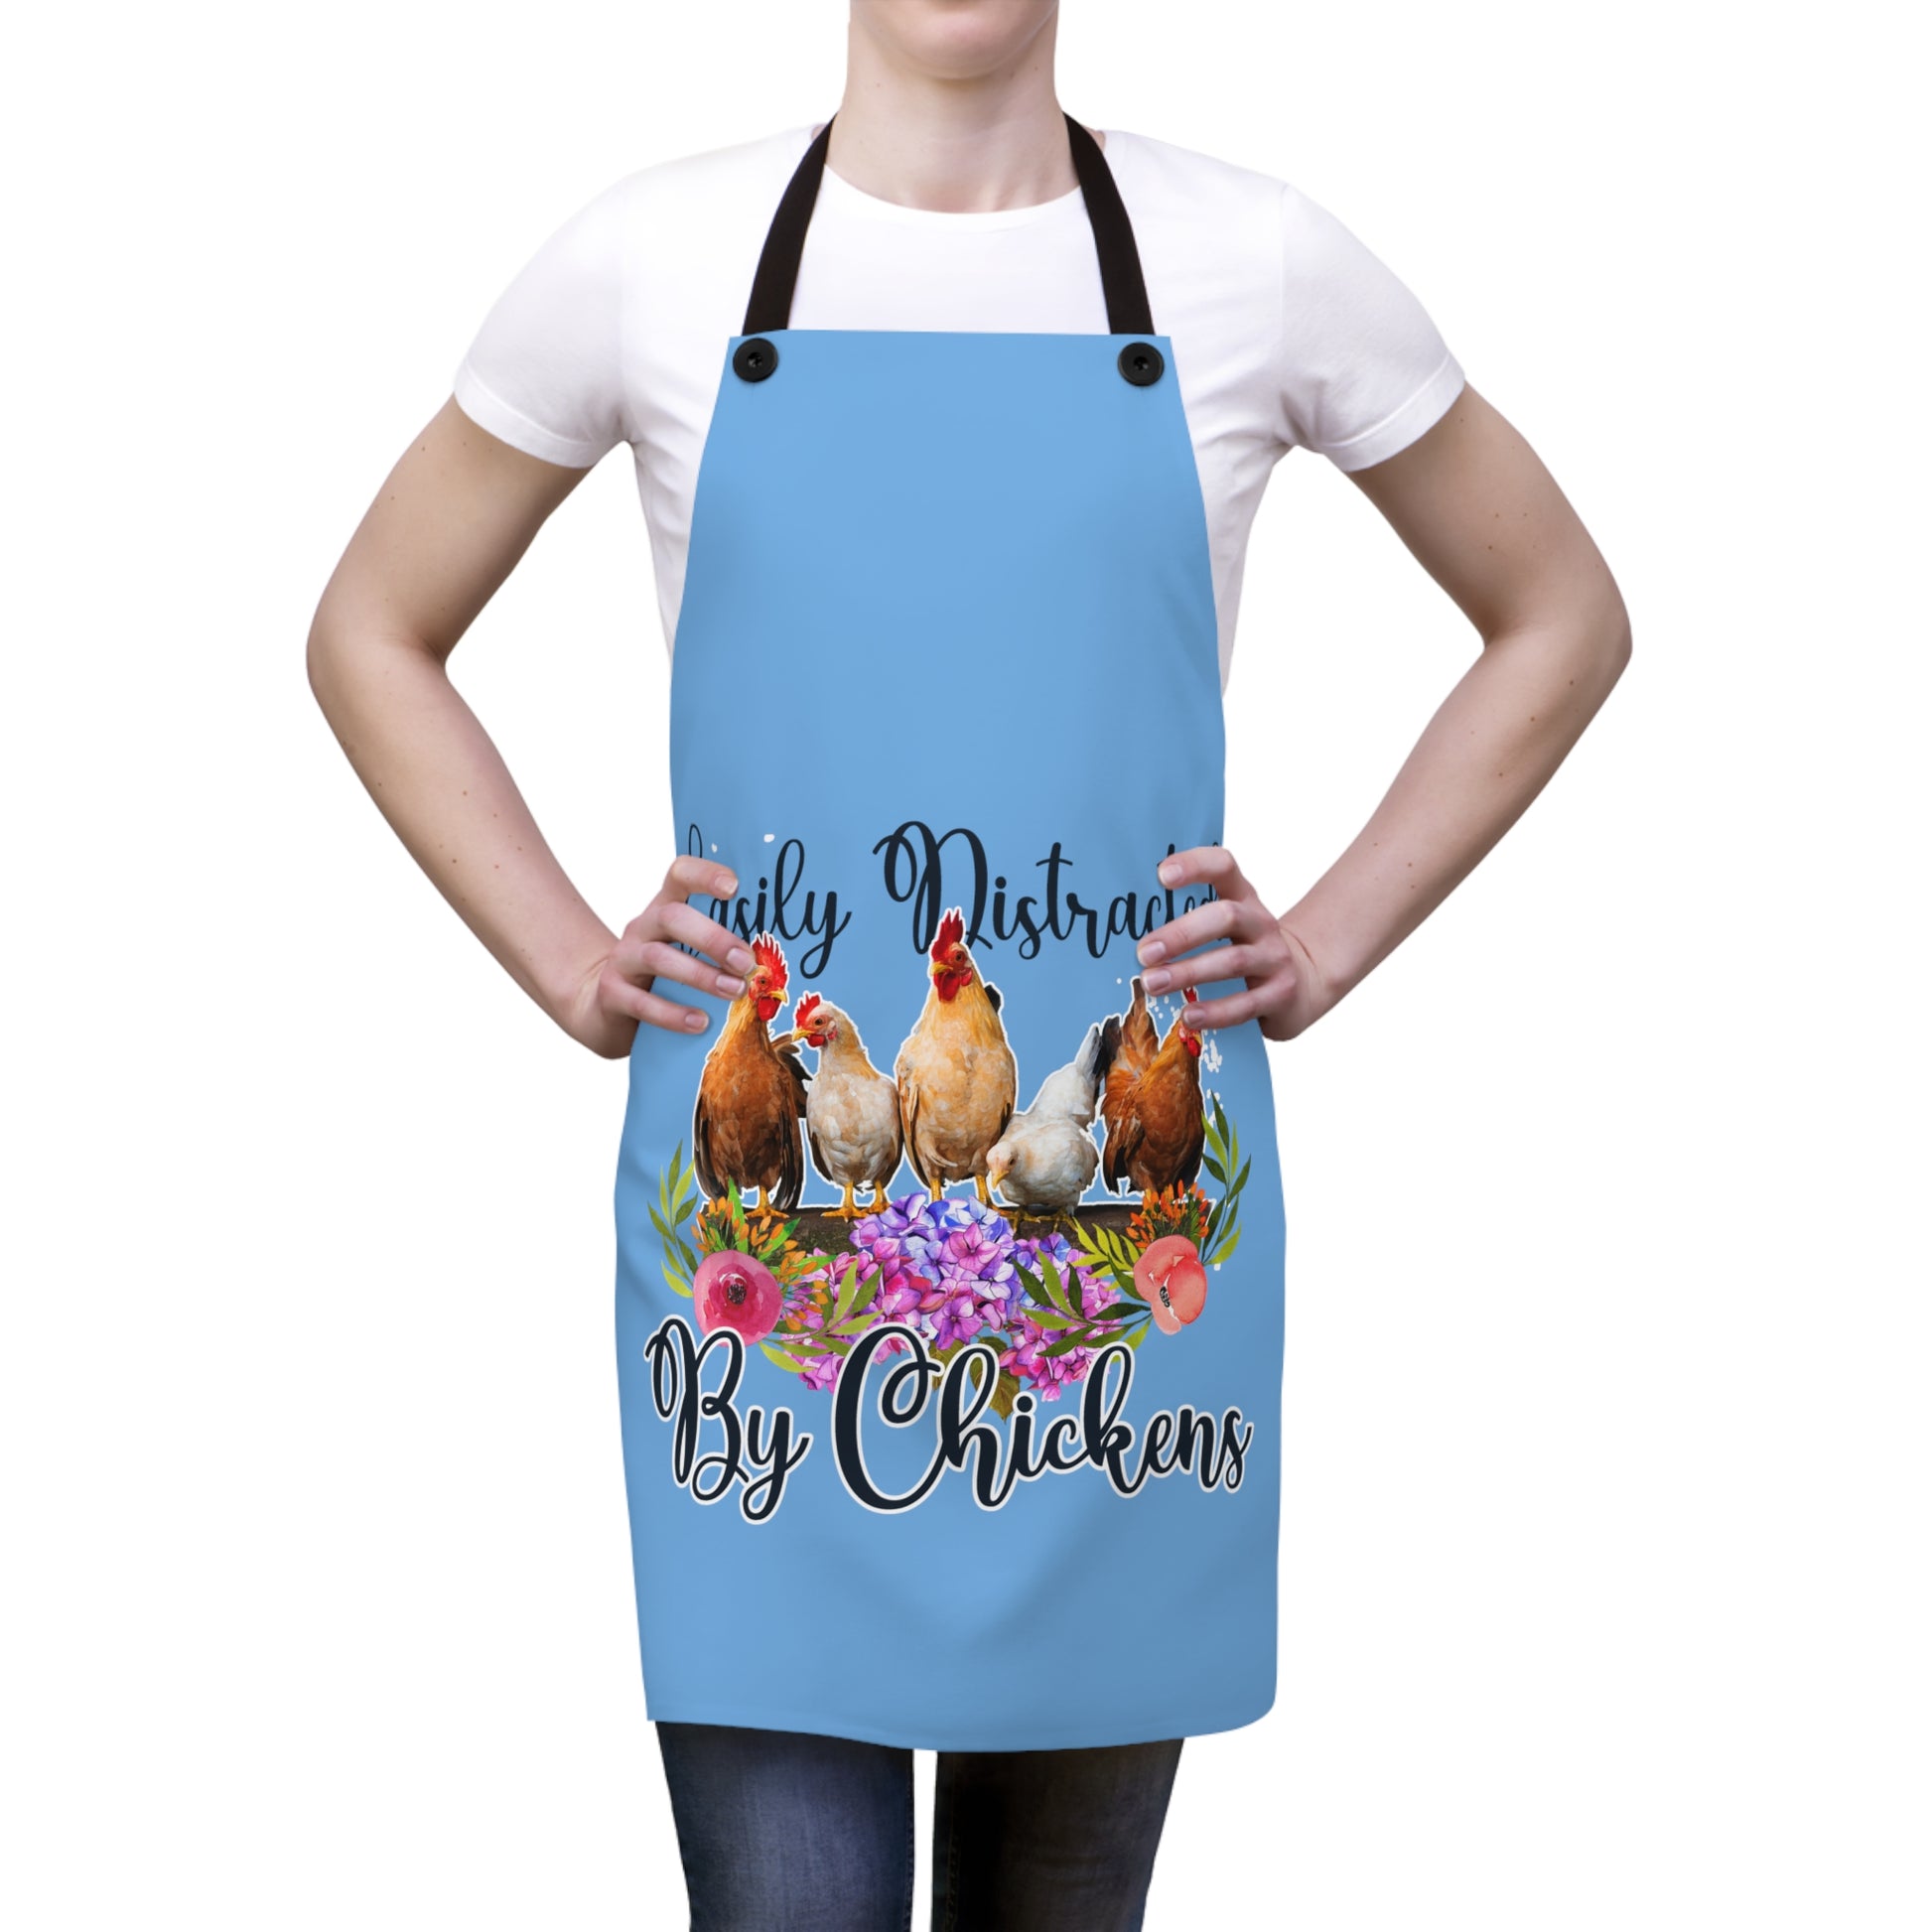 Easily Distracted by Chickens Apron on women